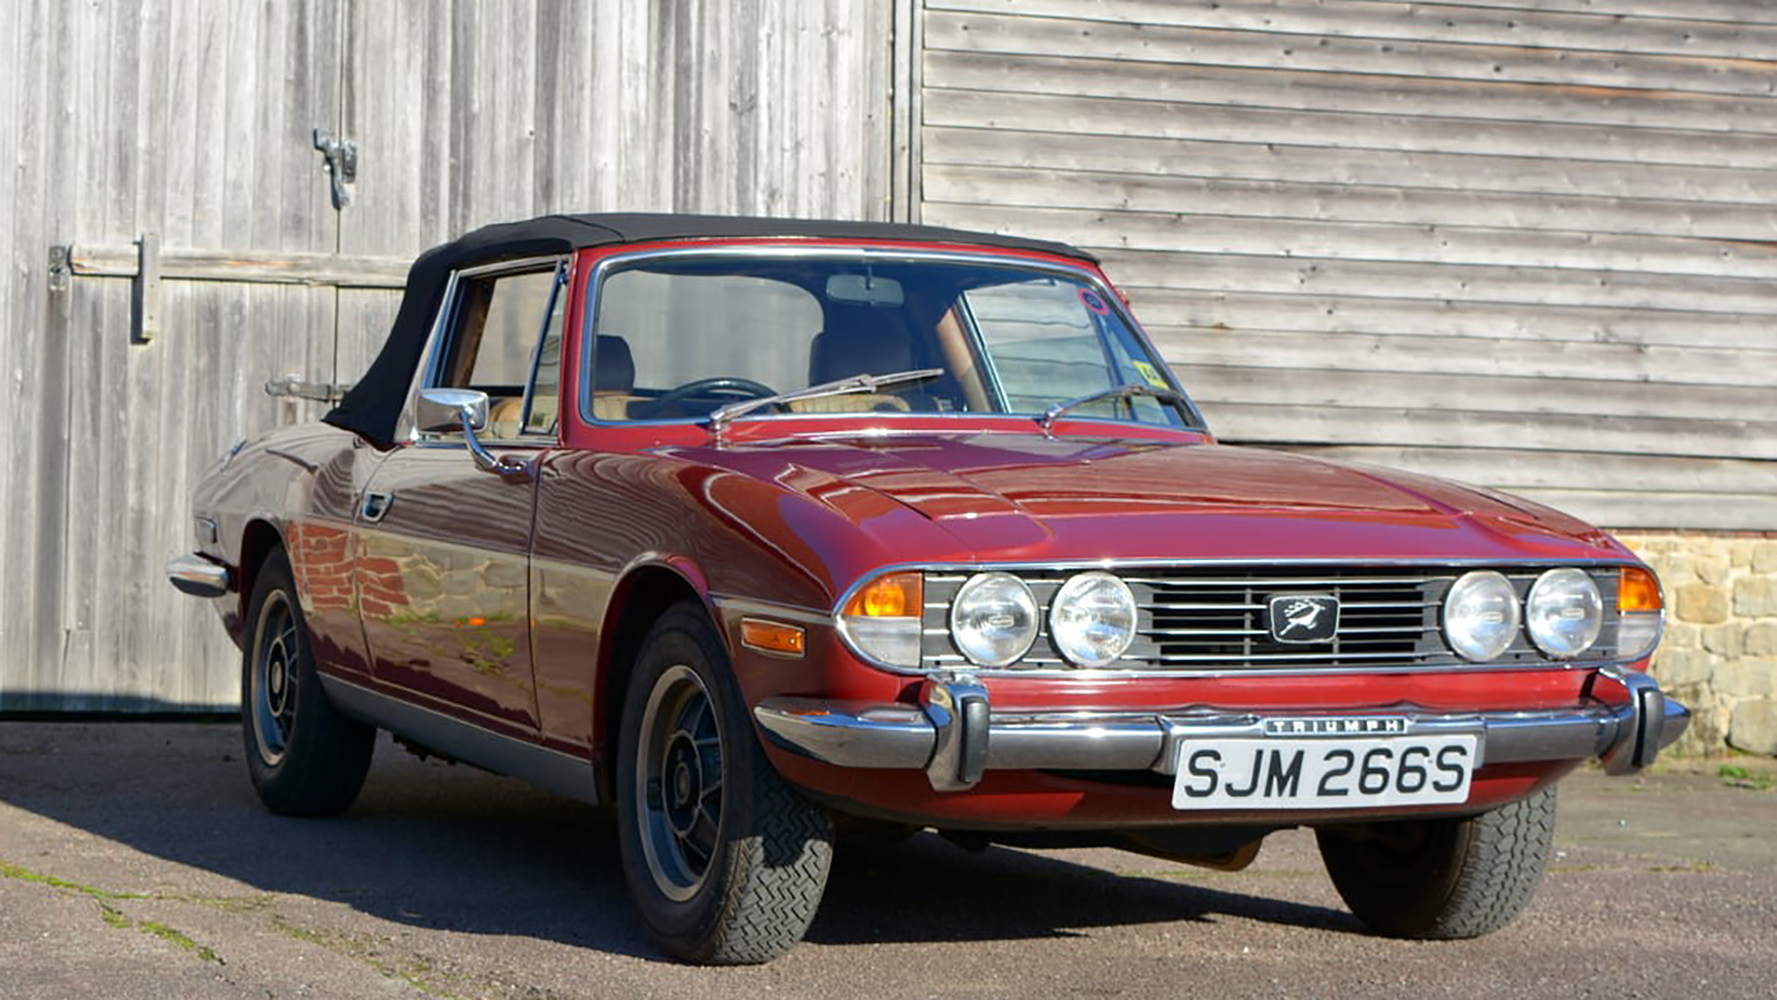 Country Classic Cars - Classic Car Servicing, Restoration & Sales in Surrey &West Sussex